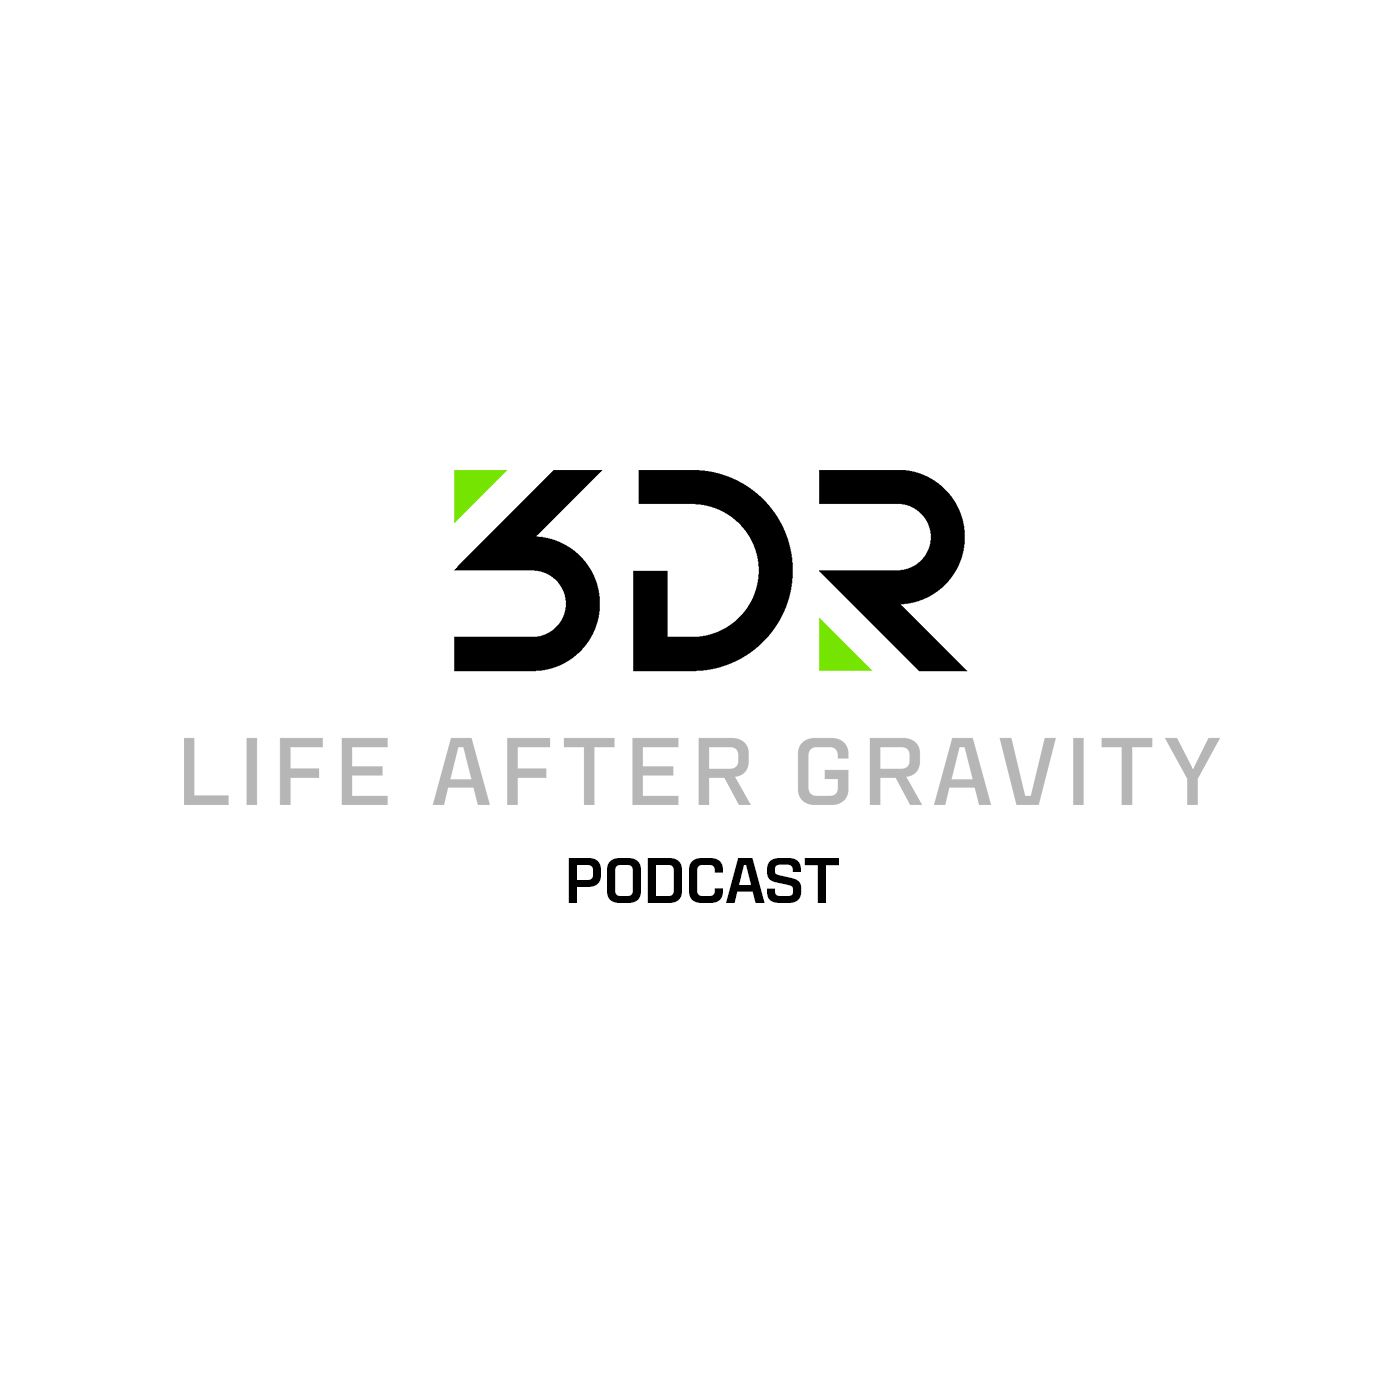 3DR Life After Gravity Podcast